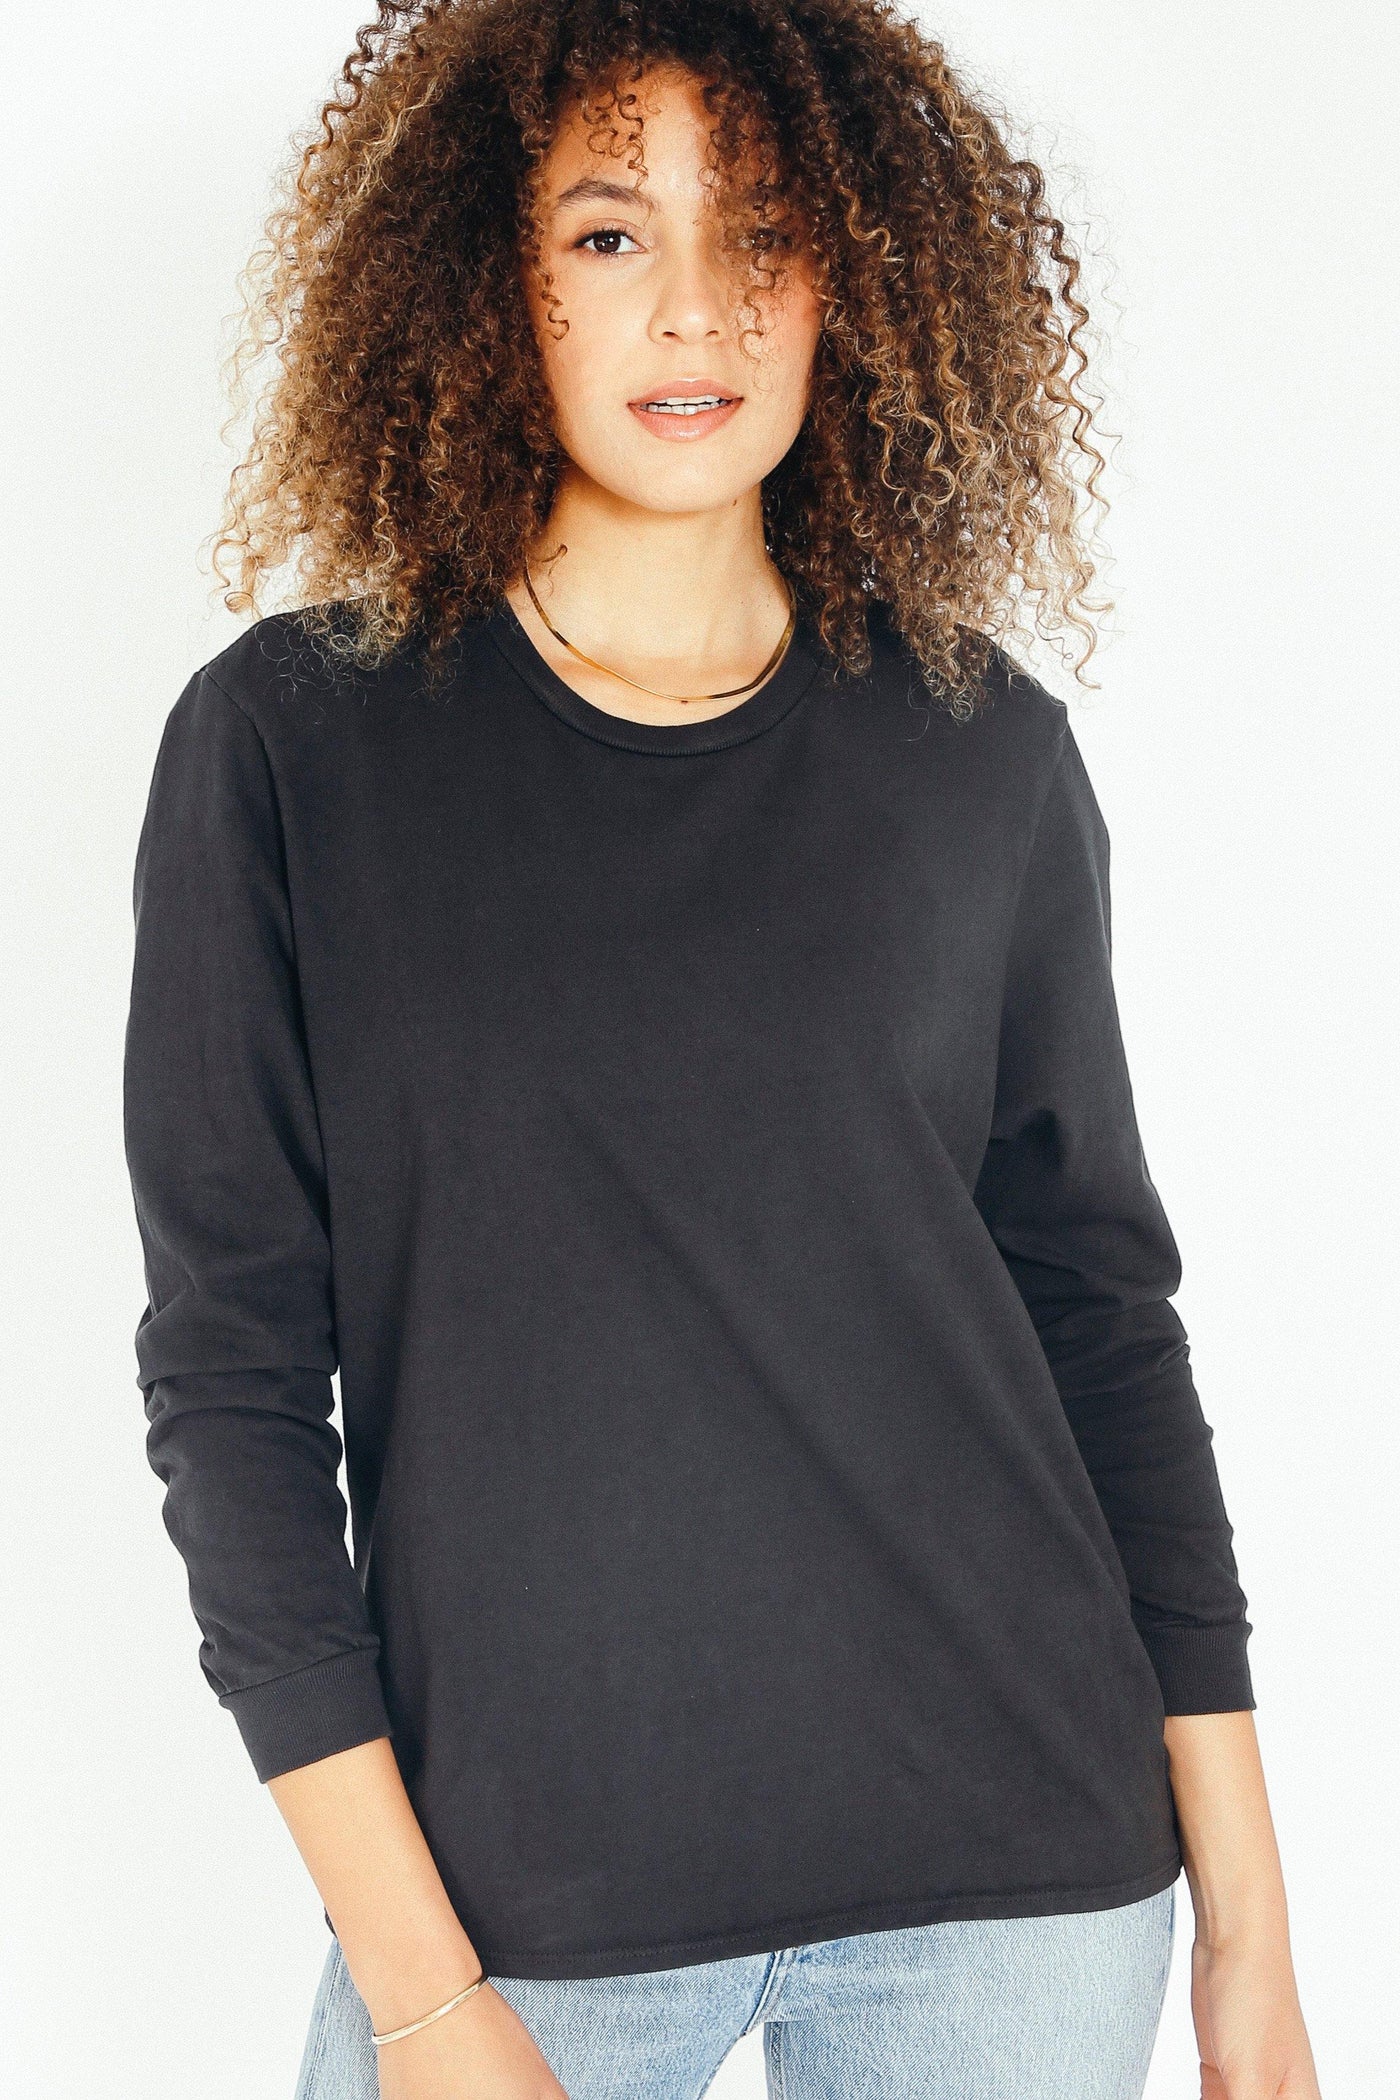 This is the perfect long sleeve cotton tee. Available in several colors (pictured in Vintage Black). Buy now!  Edit alt text